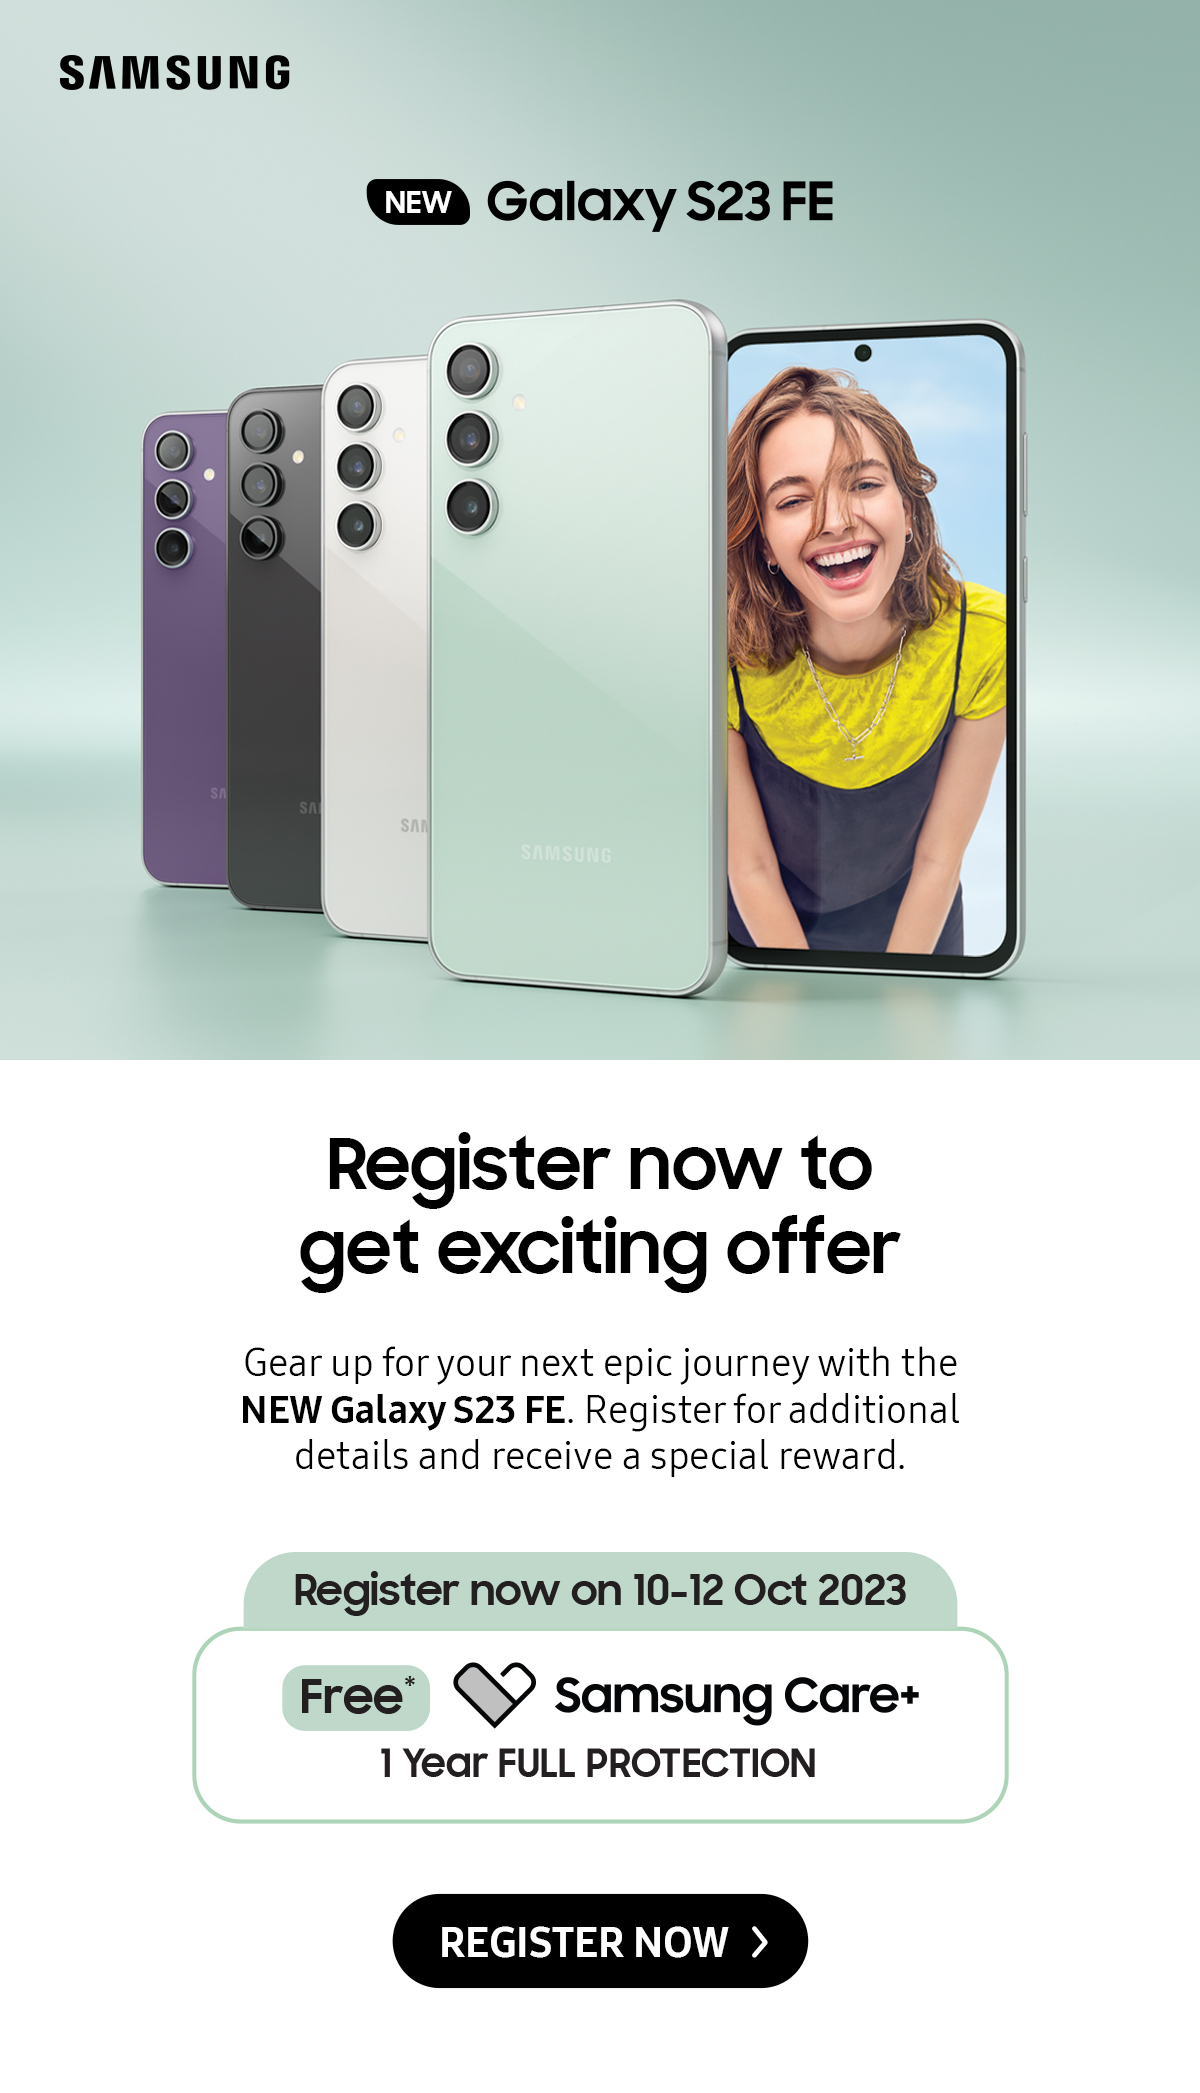 NEW Samsung Galaxy S23 FE | Gear up for your next epic journey with the NEW Galaxy S23 FE. Register for additional details and receive a special reward. Click here to register now!